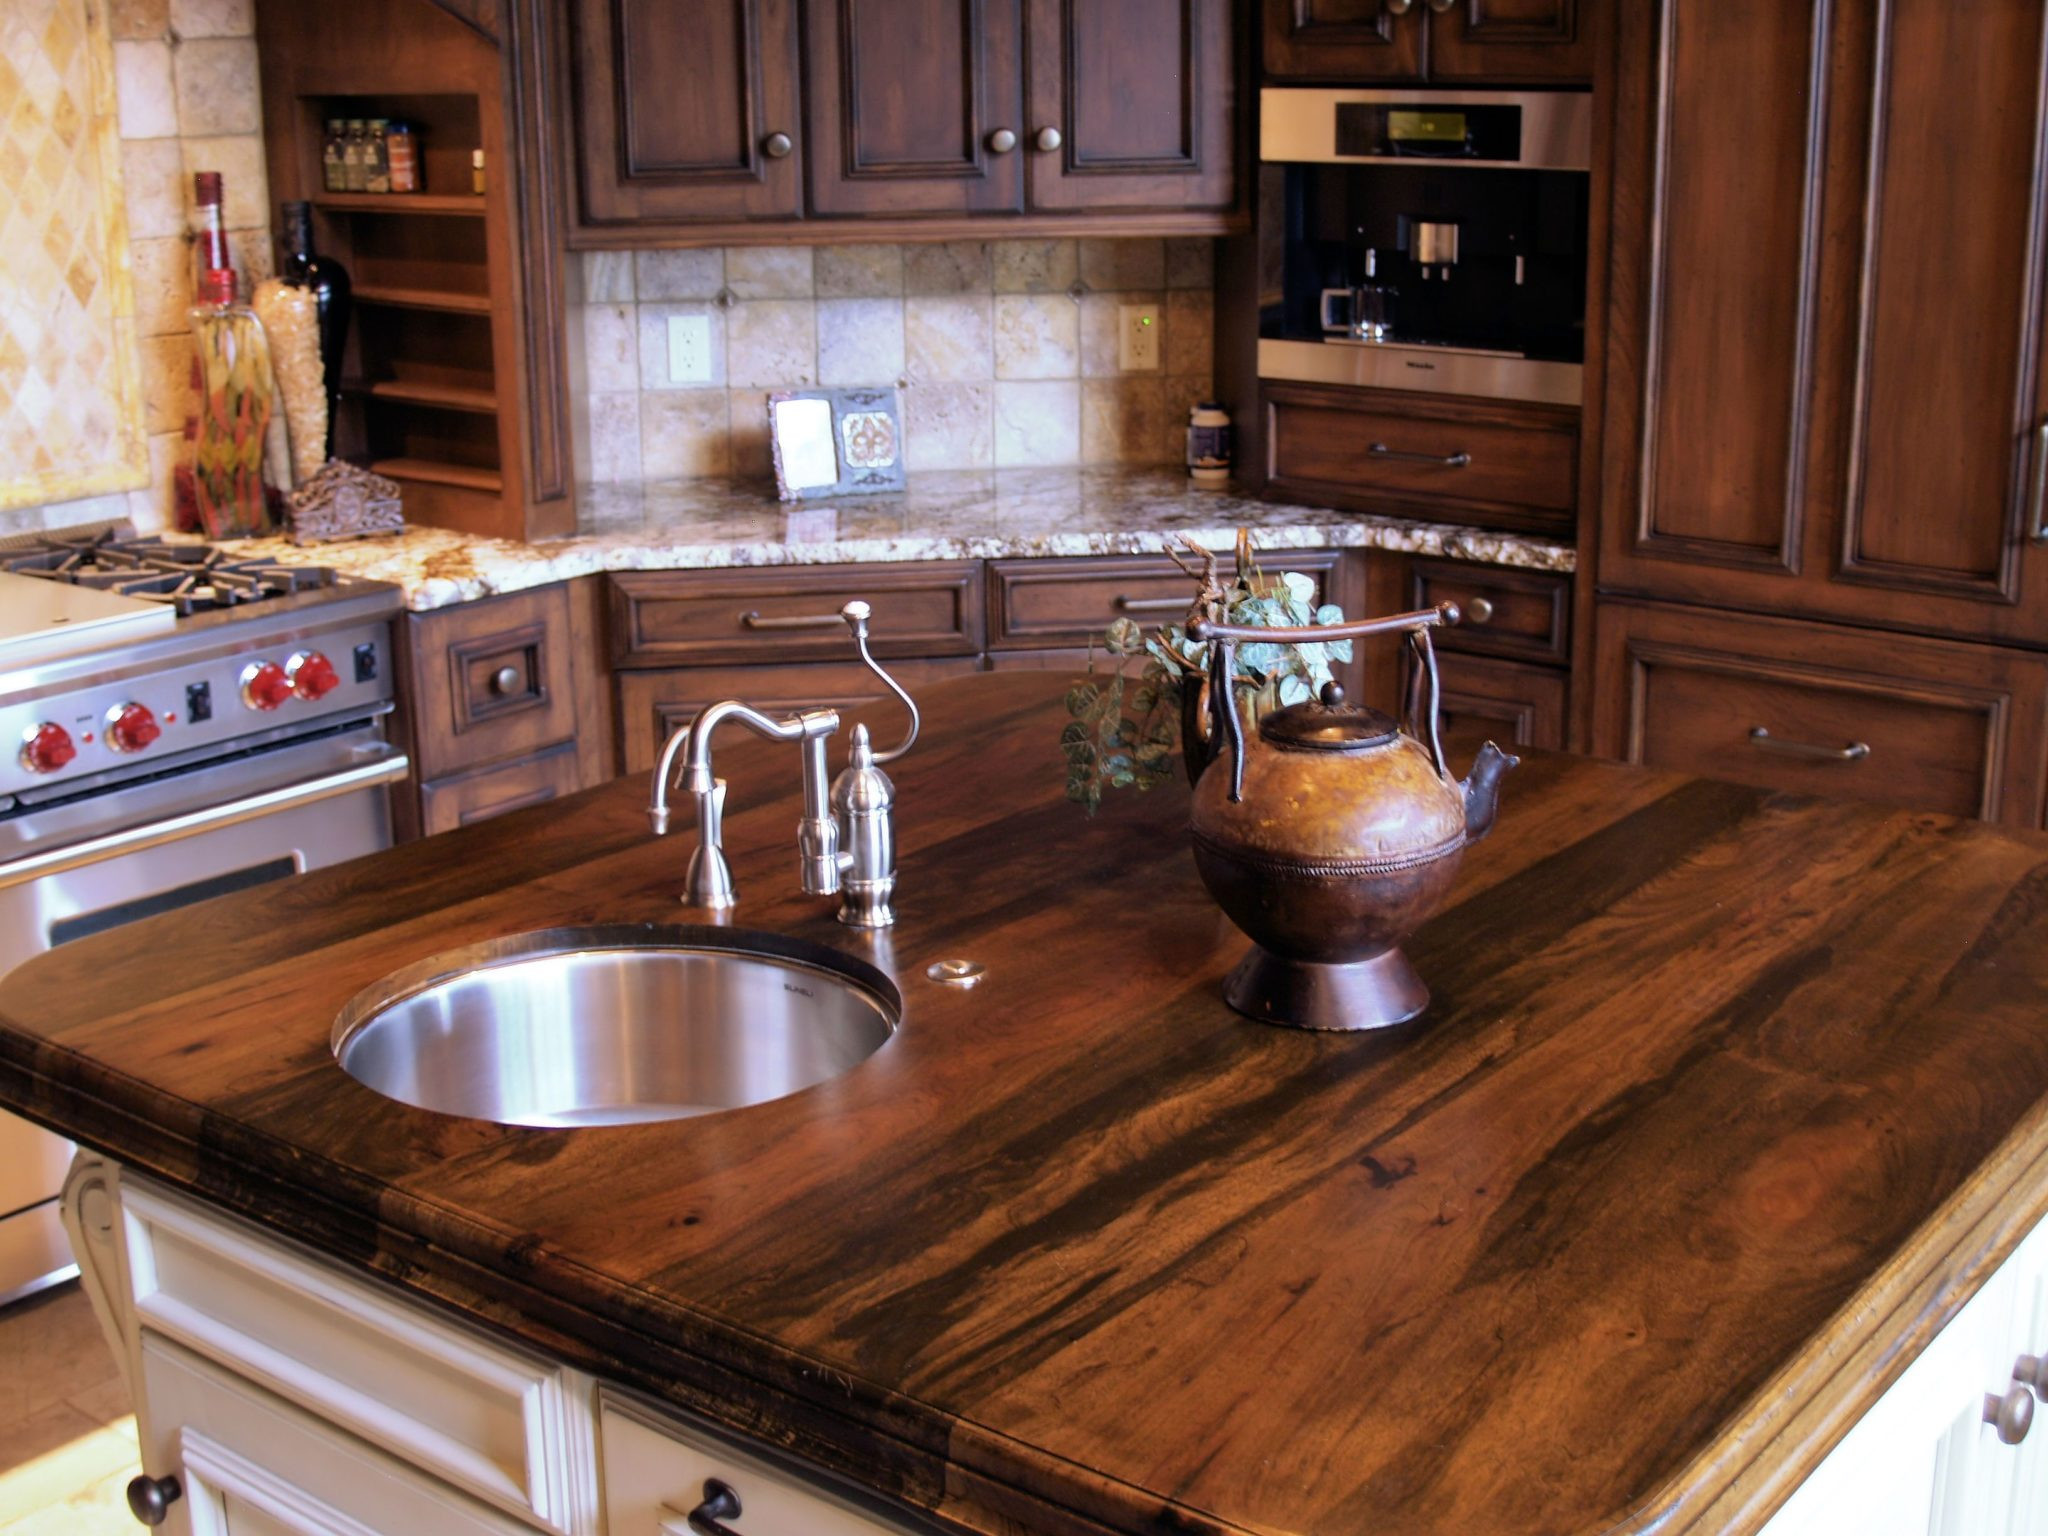 Wood Kitchen Counters
 Charming and Classy Wooden Kitchen Countertops